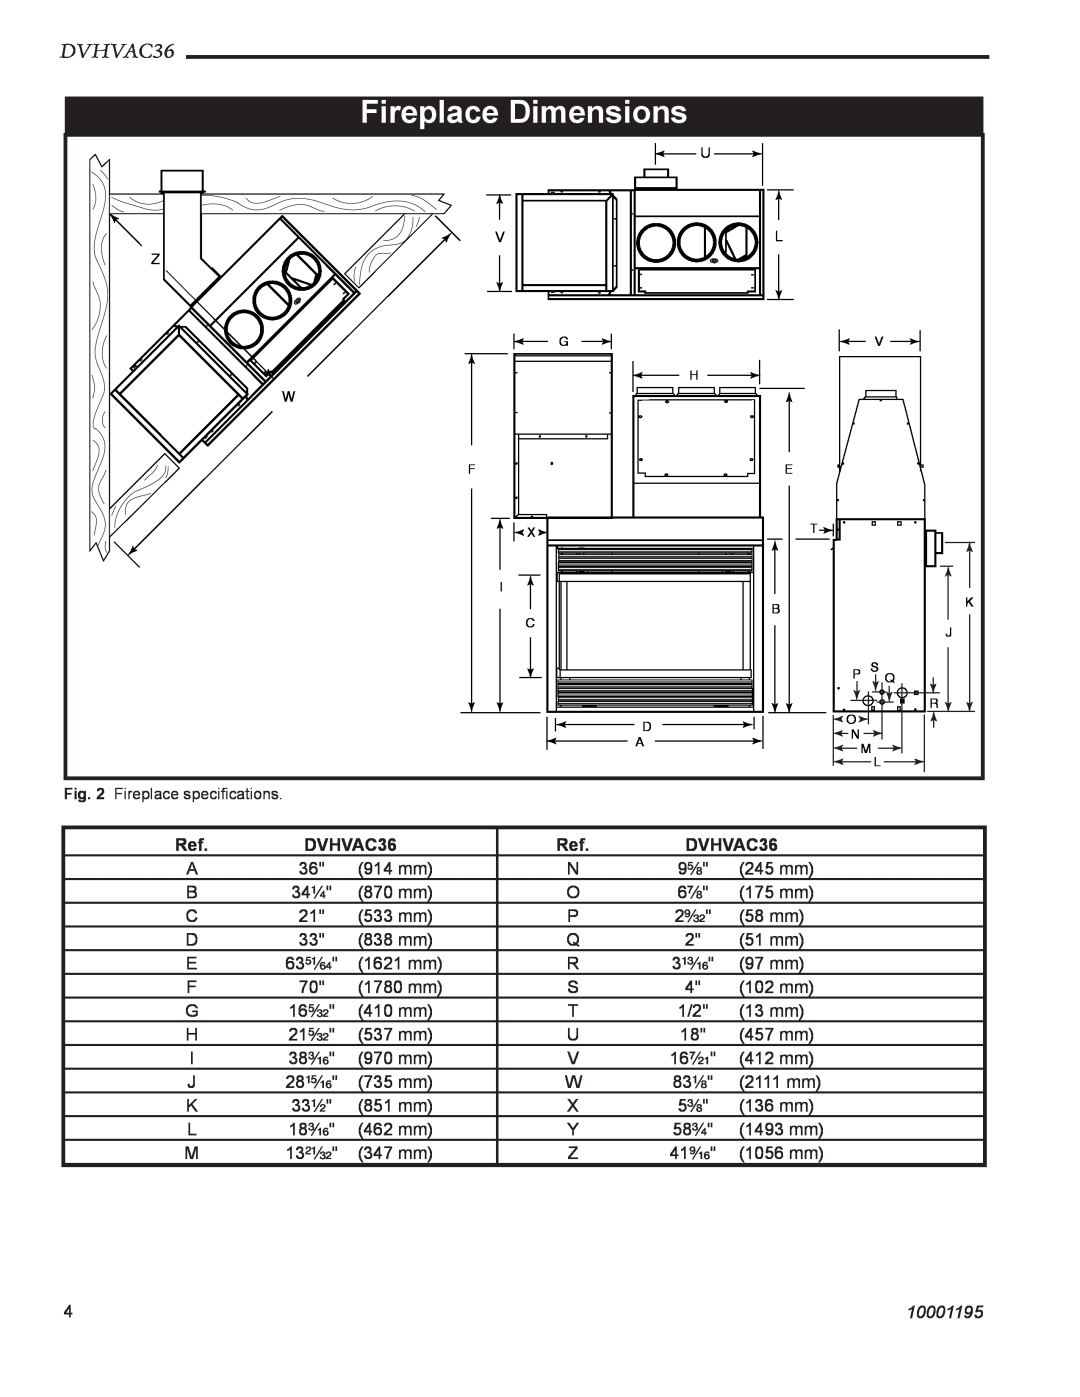 Vermont Casting DVHVAC36 manual Fireplace Dimensions, 10001195 